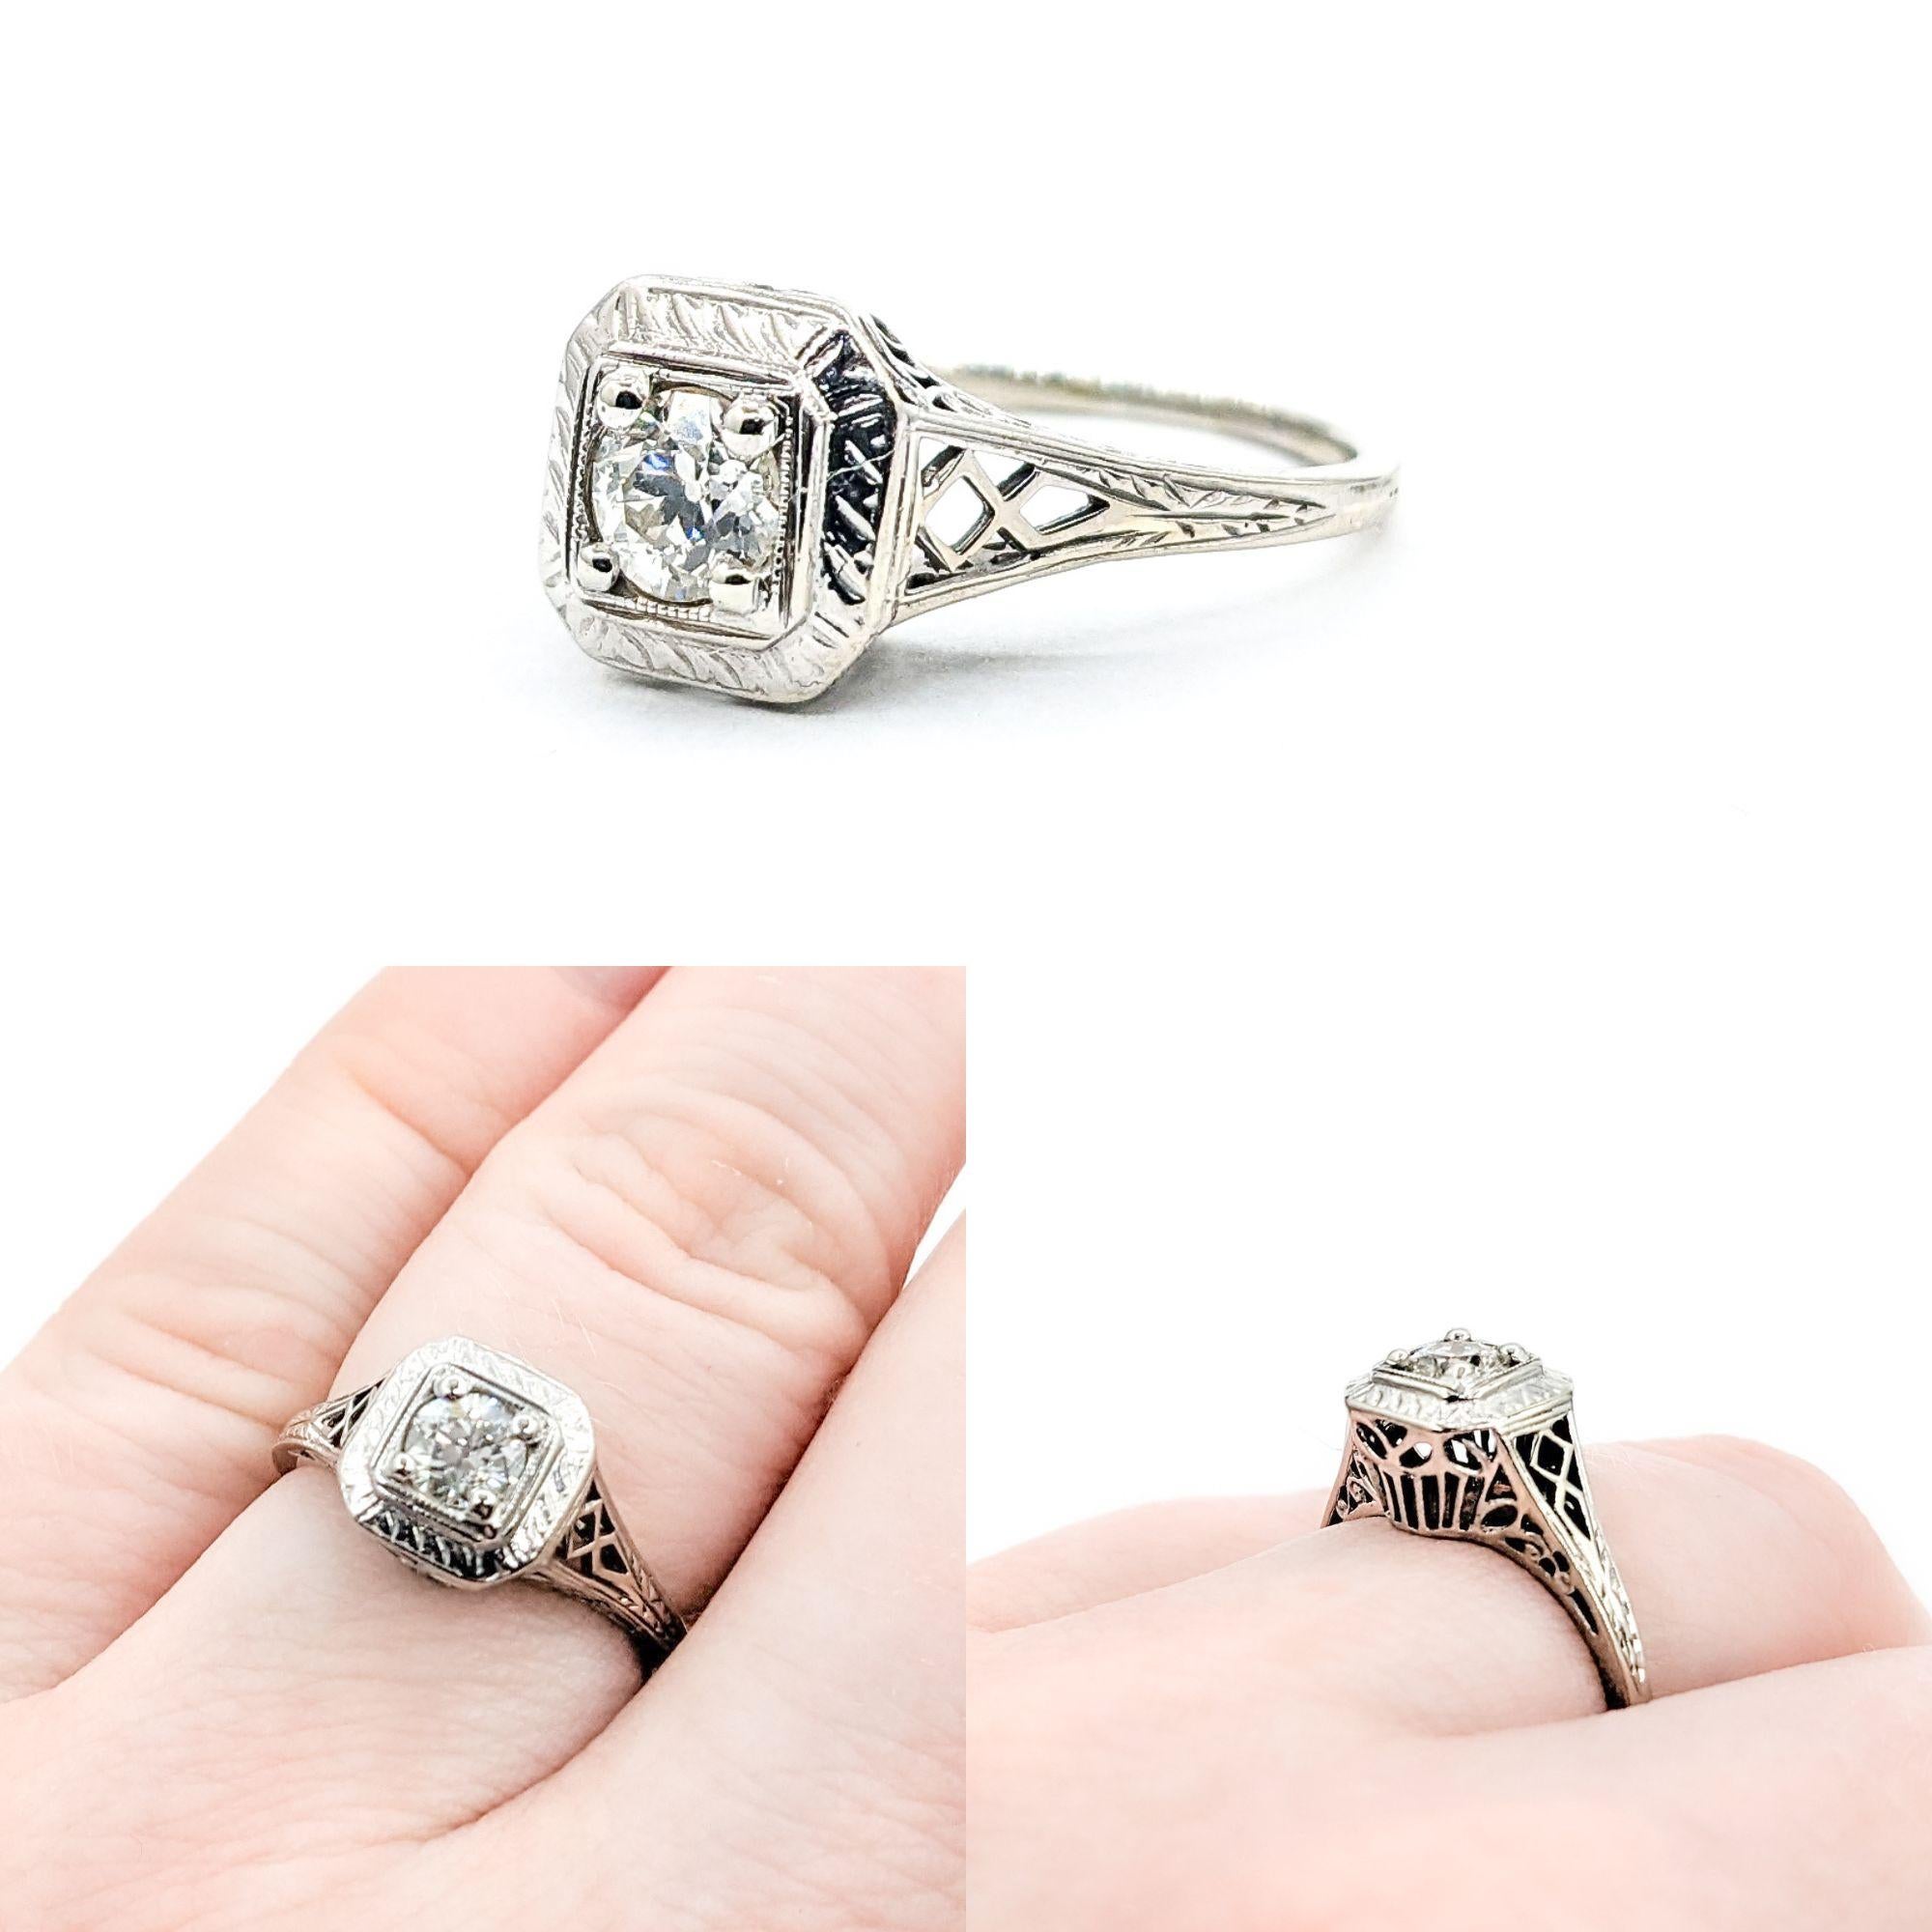 Antique Art Deco Diamond Ring In White Gold


Presenting a stunning Antique Art Deco Ring meticulously crafted in 14kt White Gold. This ring showcases a captivating .33ct Old European Diamond as its centerpiece, set against a backdrop of intricate